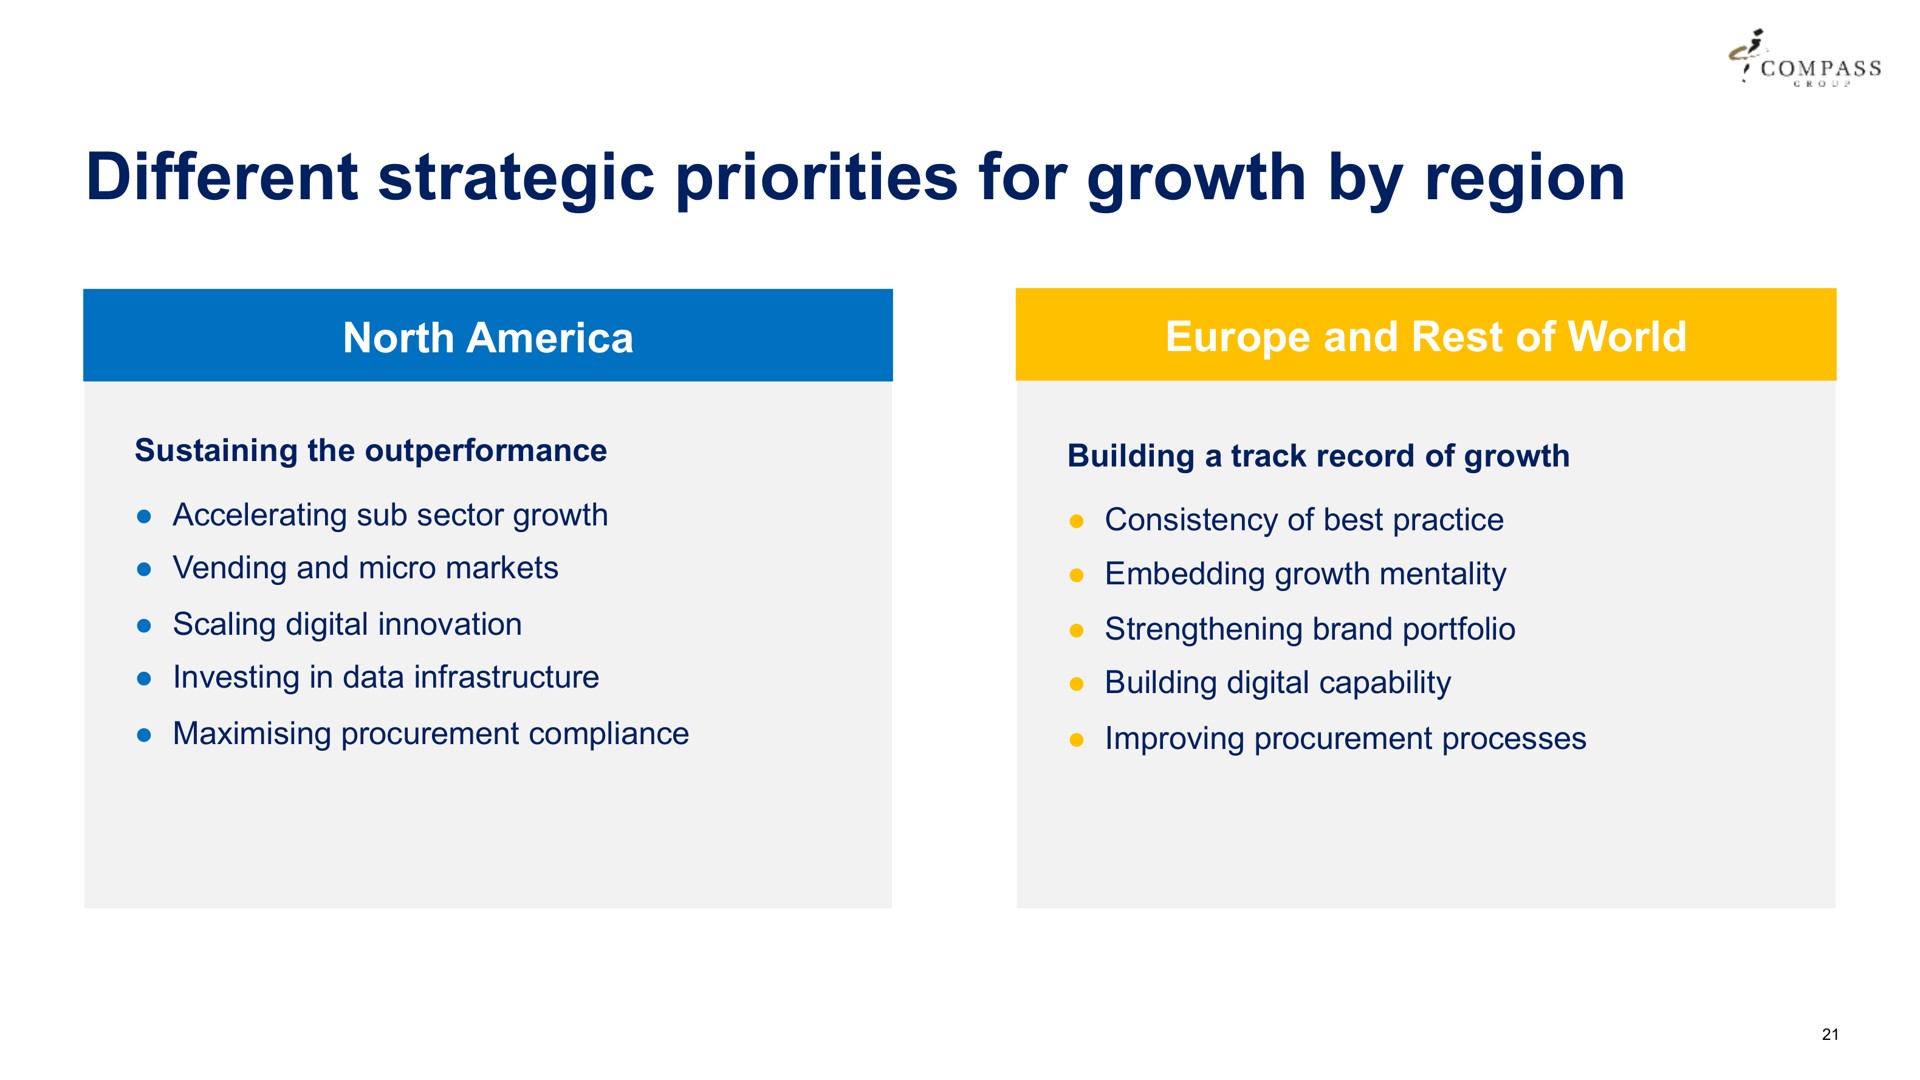 different strategic priorities for growth by region a compass north sustaining the accelerating sub sector vending and micro markets scaling digital innovation investing in data infrastructure building a track record of consistency of best practice embedding mentality strengthening brand portfolio building digital capability procurement compliance improving procurement processes | Compass Group